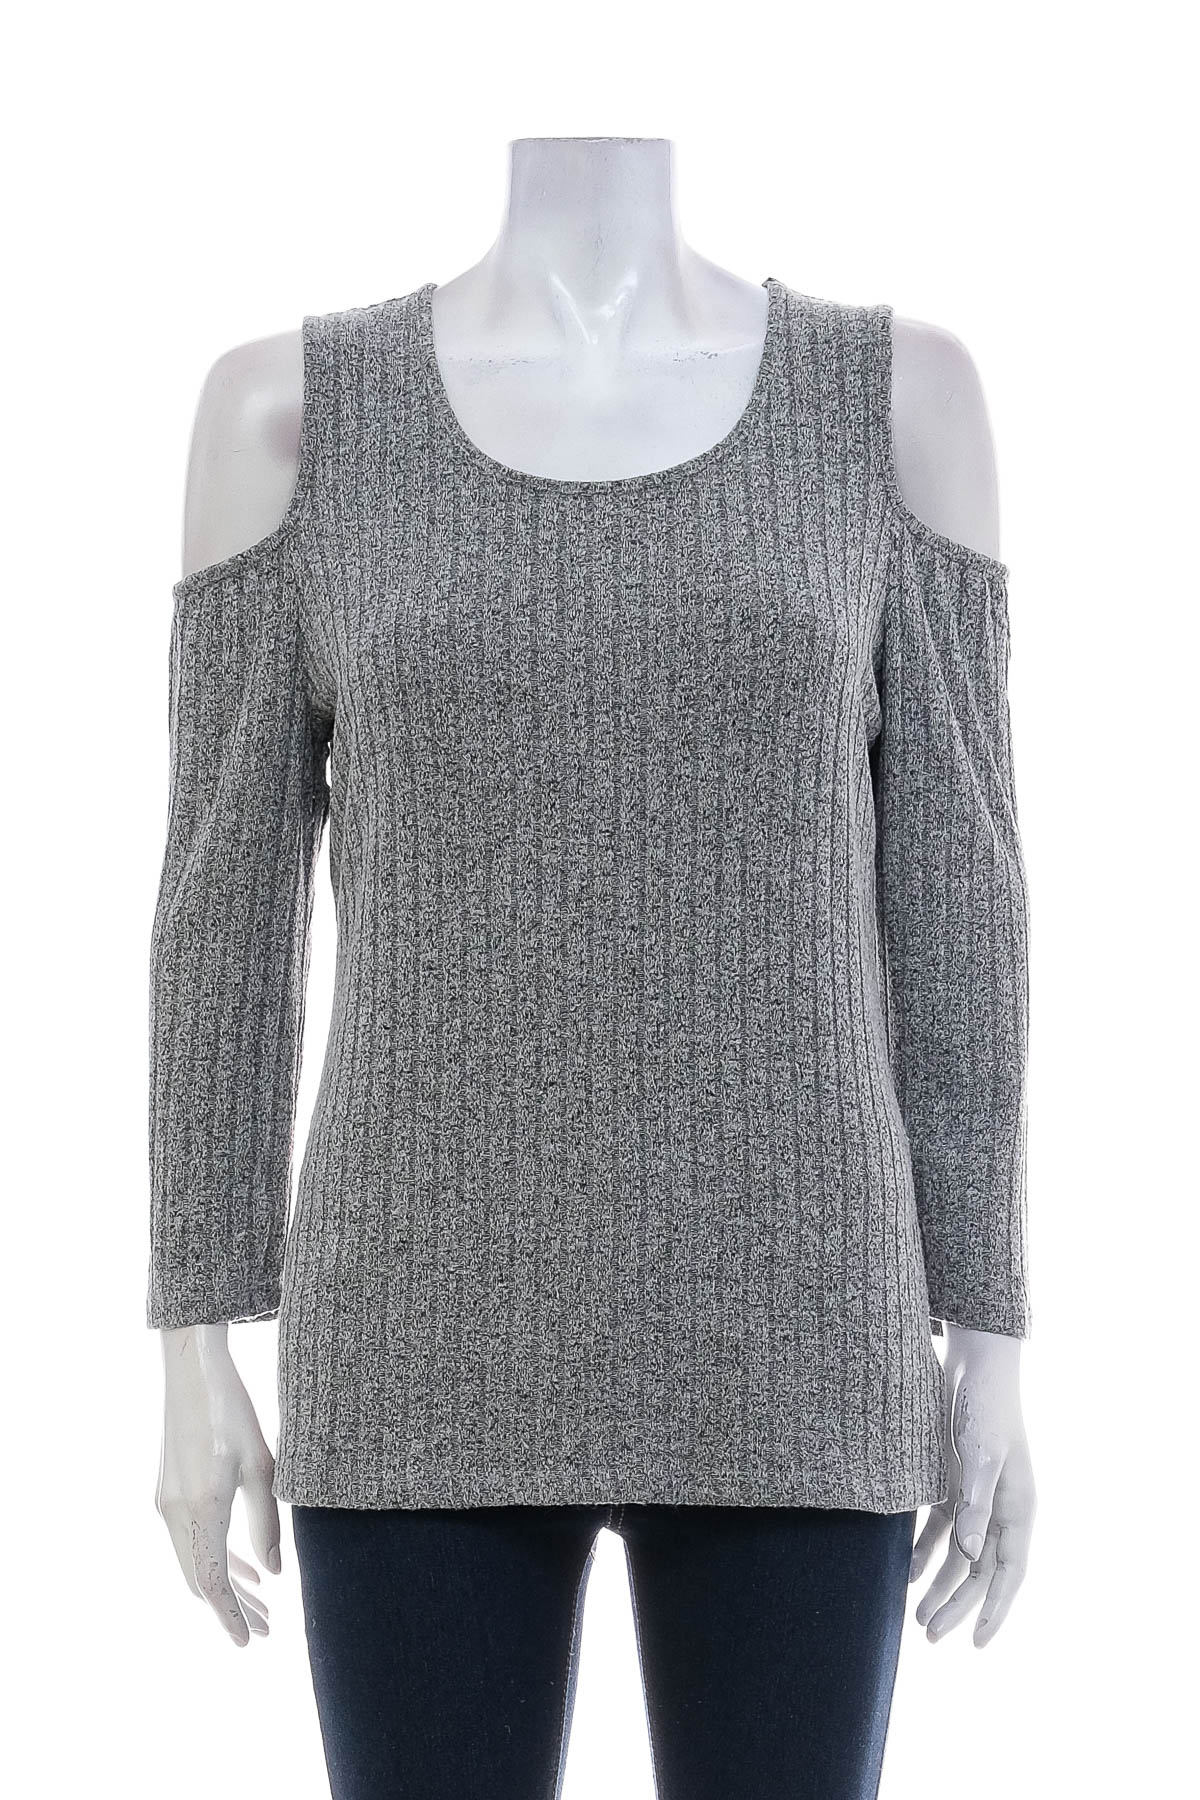 Women's sweater - Lily White - 0